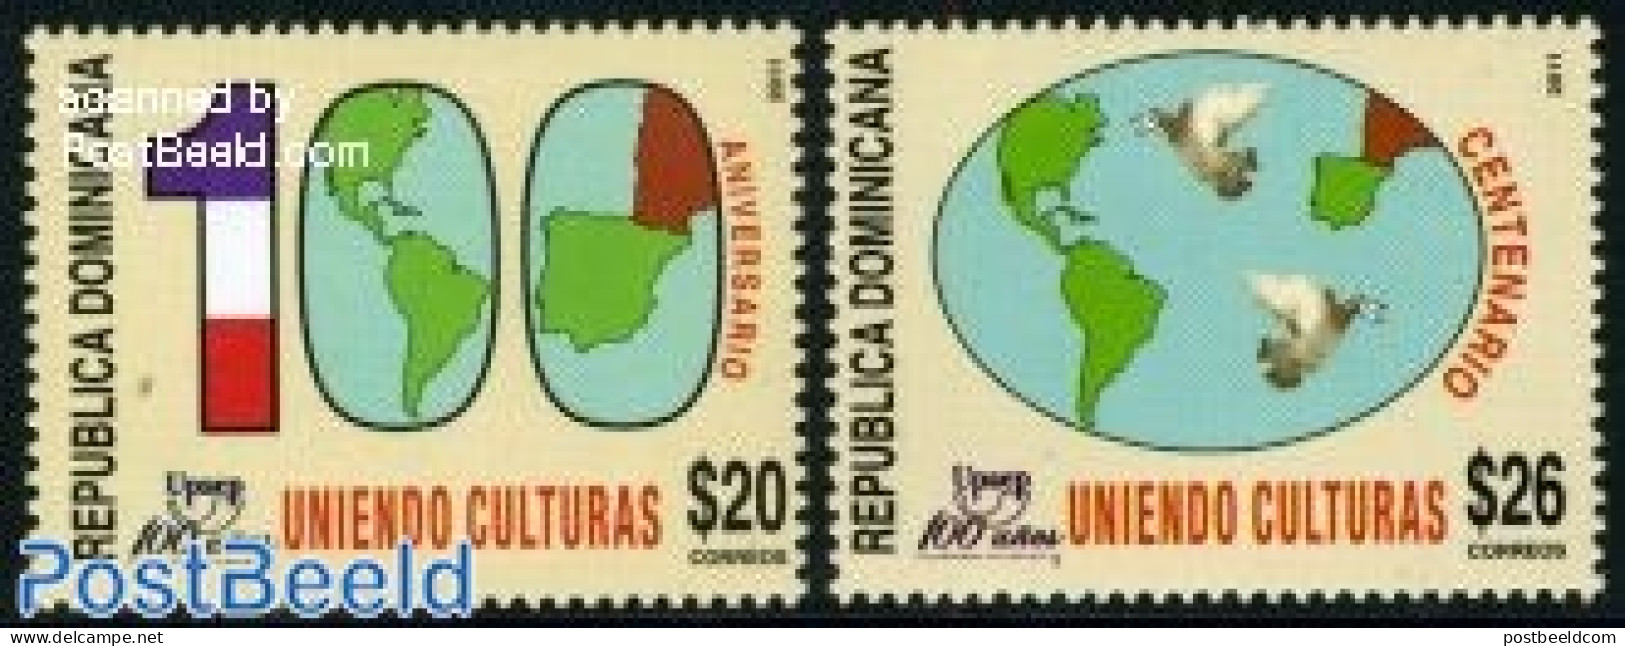 Dominican Republic 2011 100 Years UPAEP 2v, Mint NH, Various - U.P.A.E. - Maps - Géographie